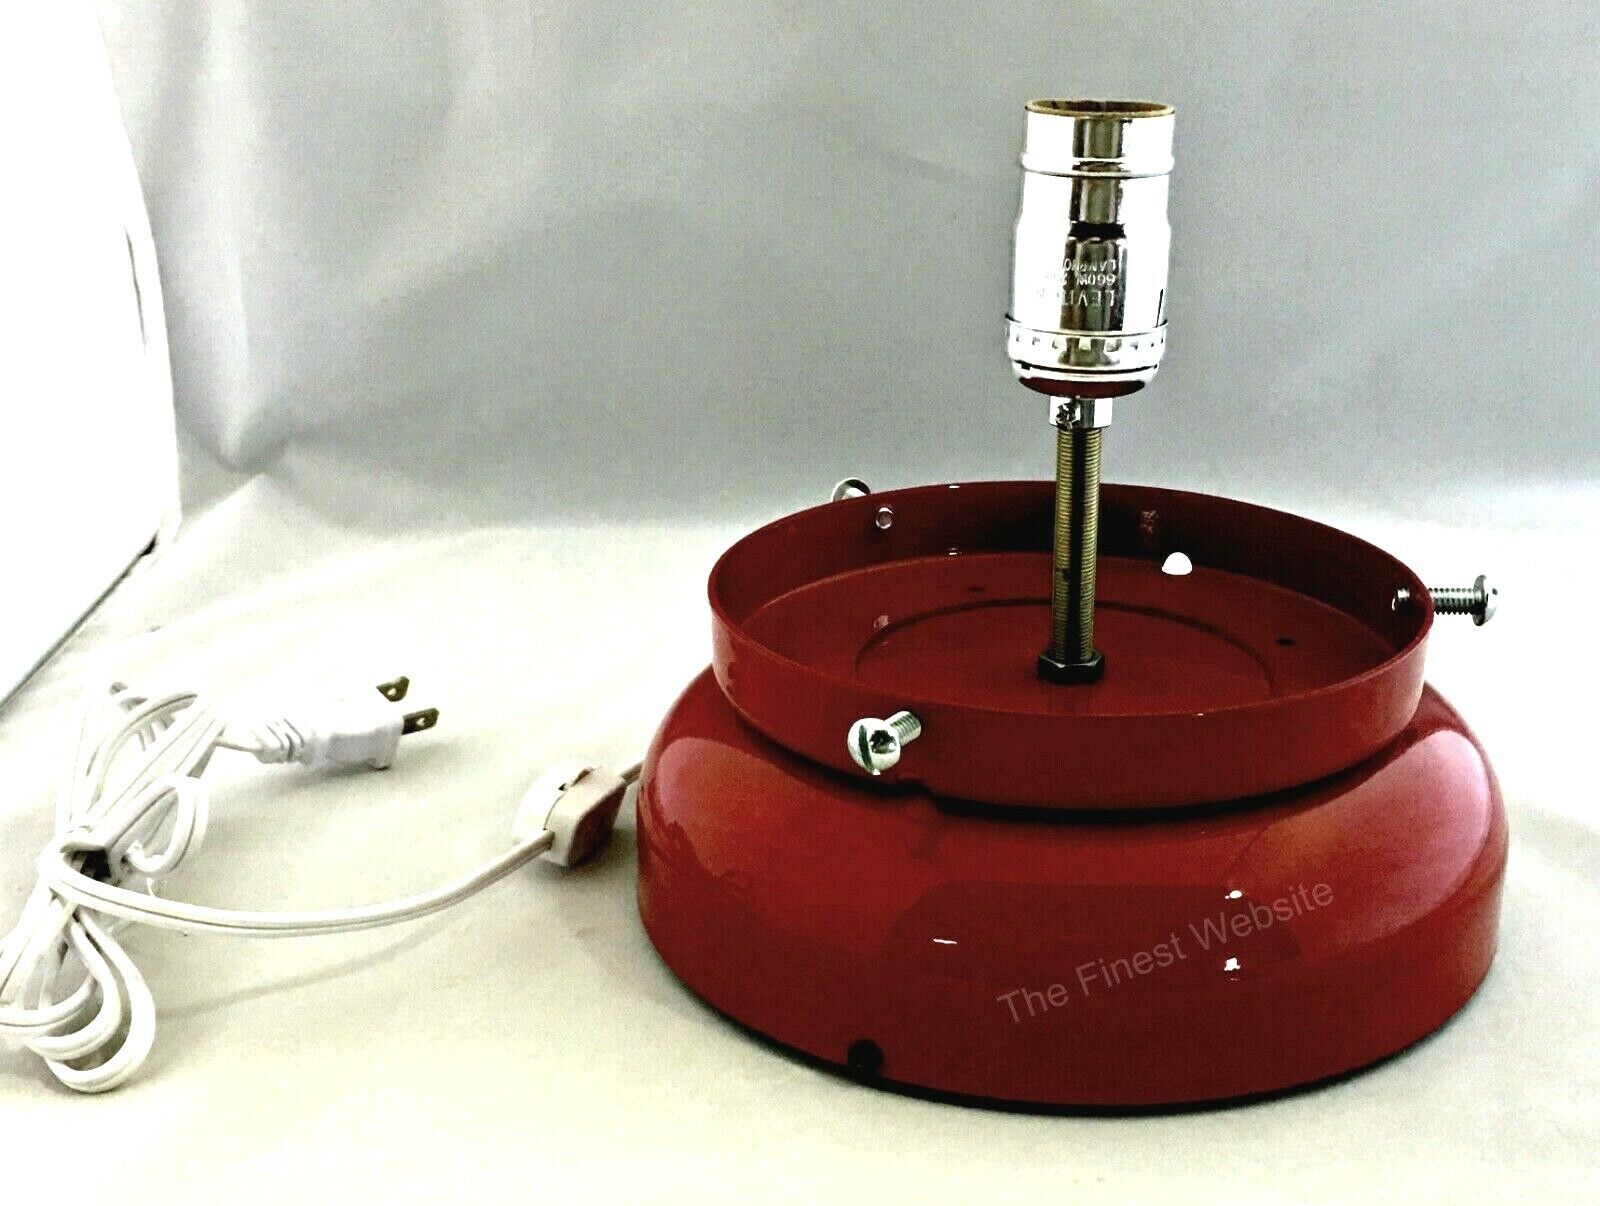 NEW GAS PUMP GLOBE LAMP STAND LIGHT FIXTURE - RED - * AND HANDLING